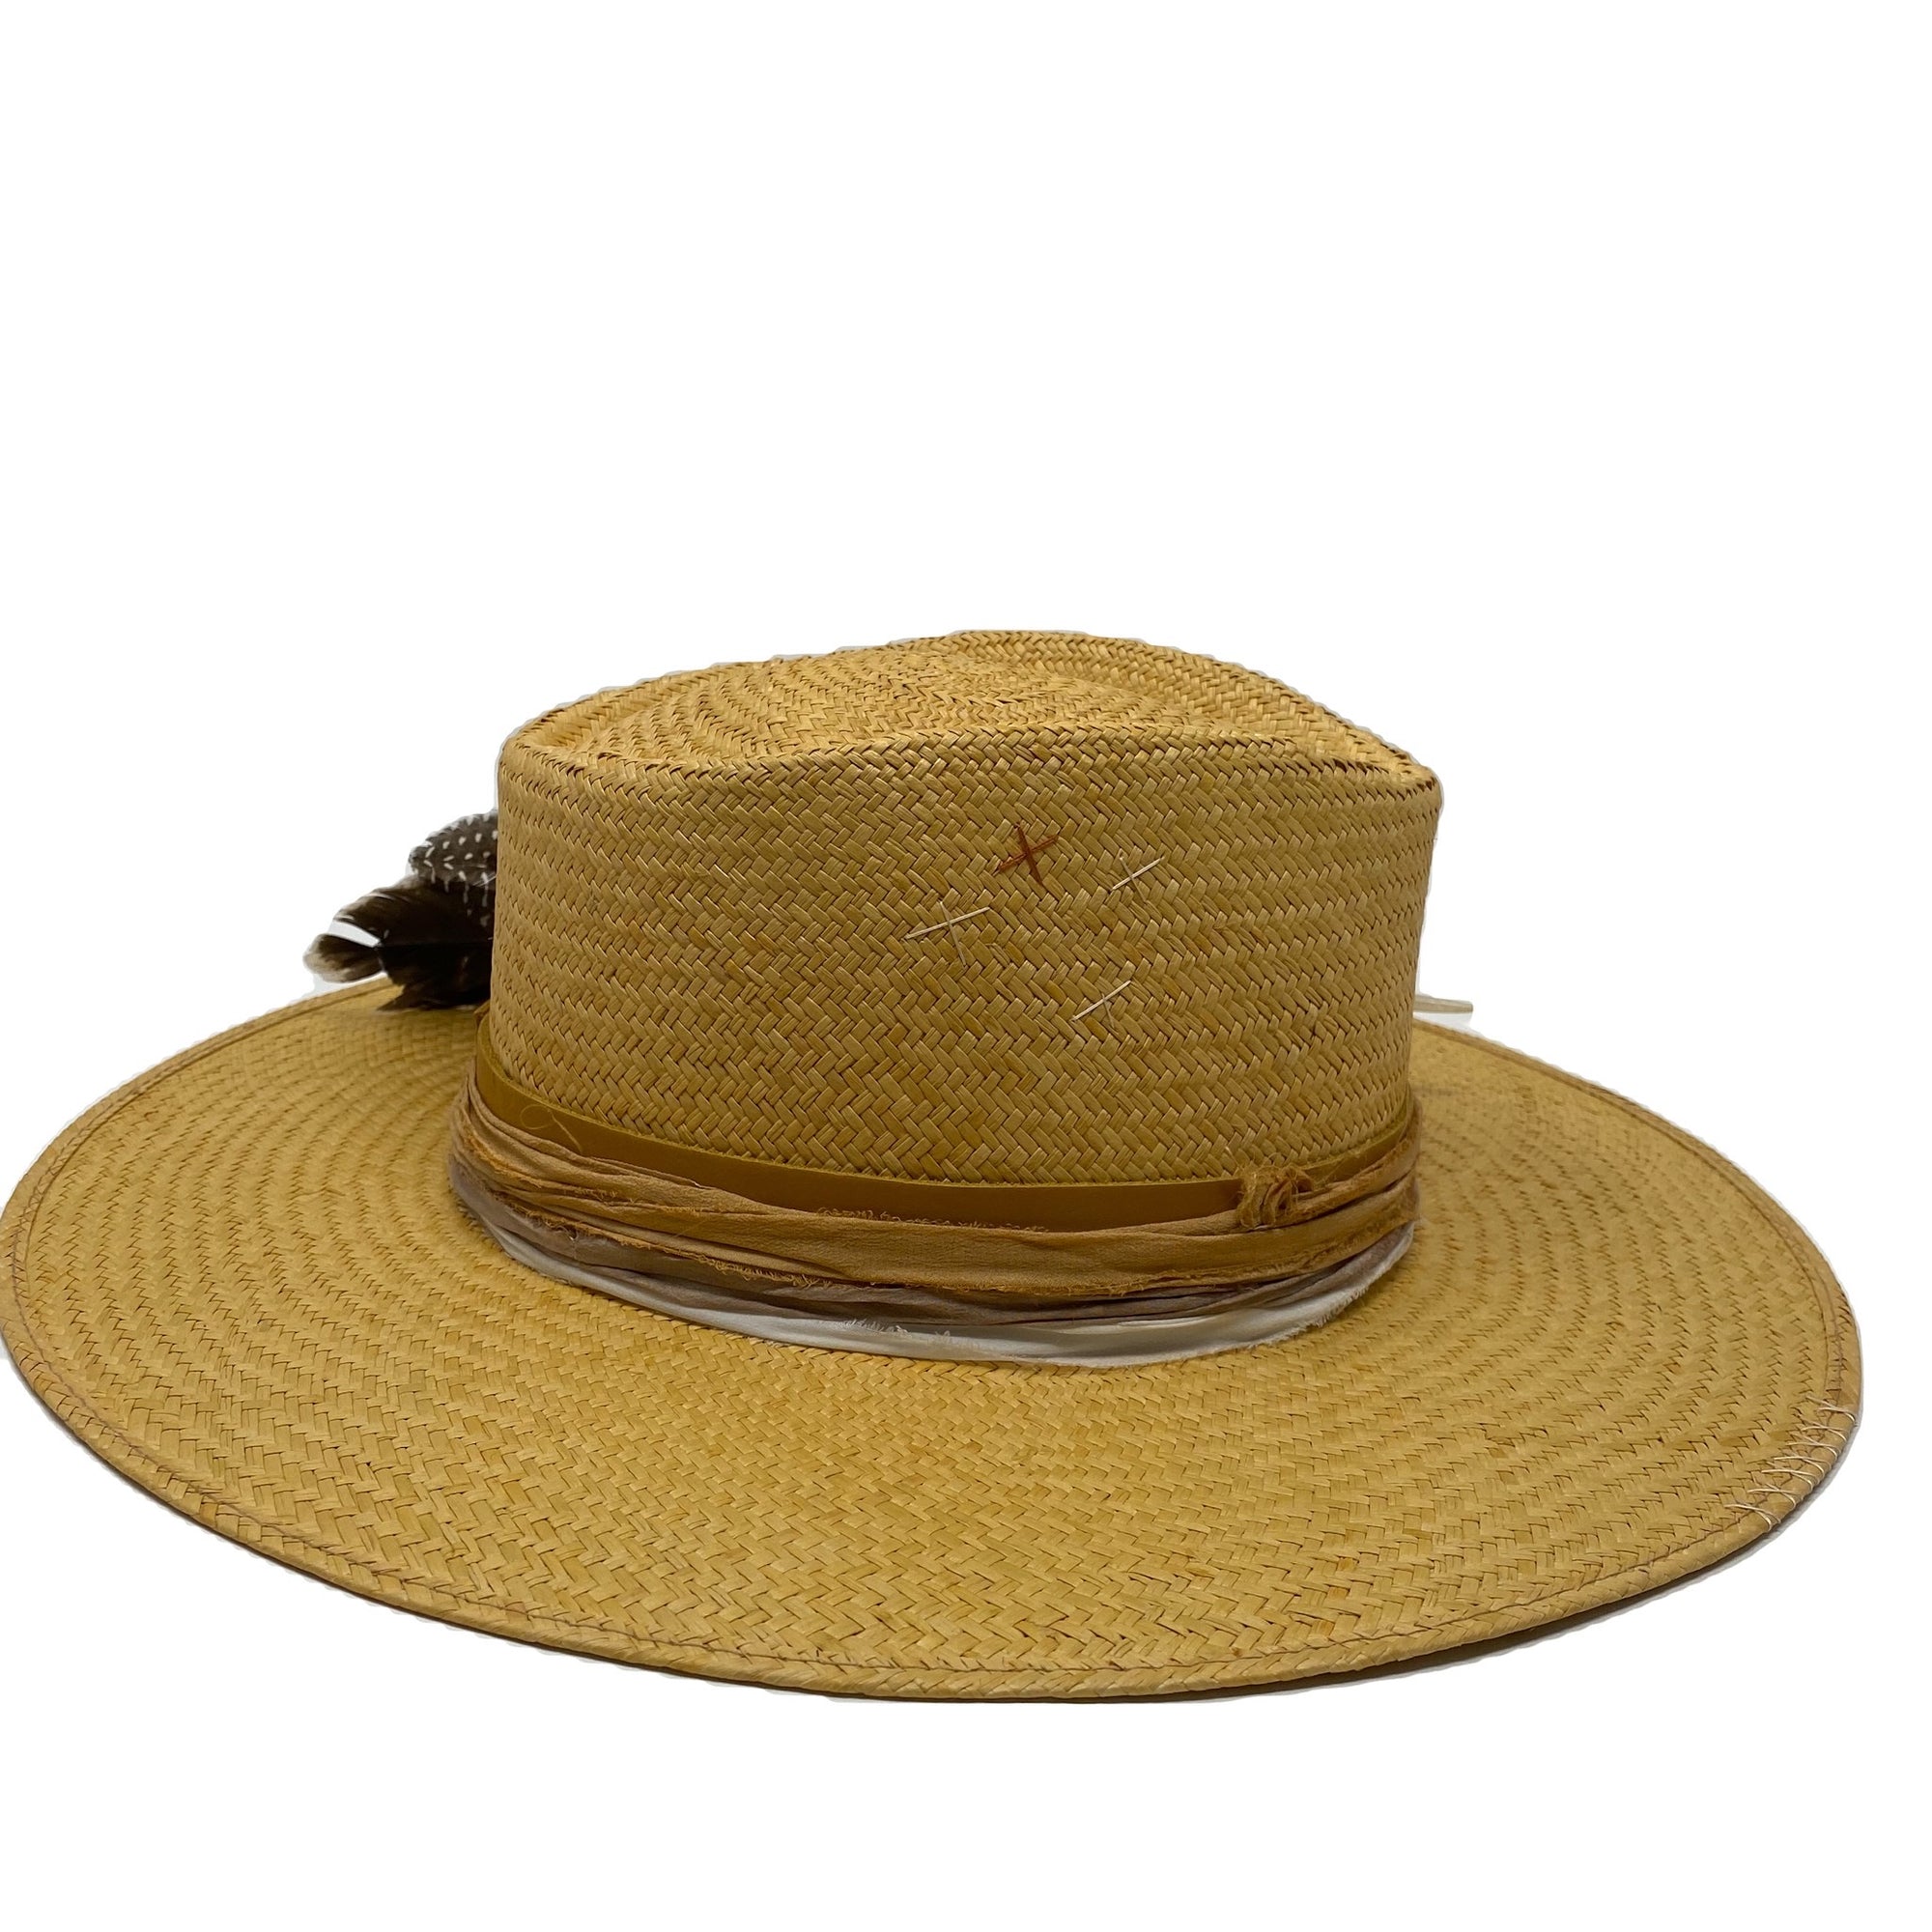 PALOMA STRAW HAT IN HABANO with embroidery and silk